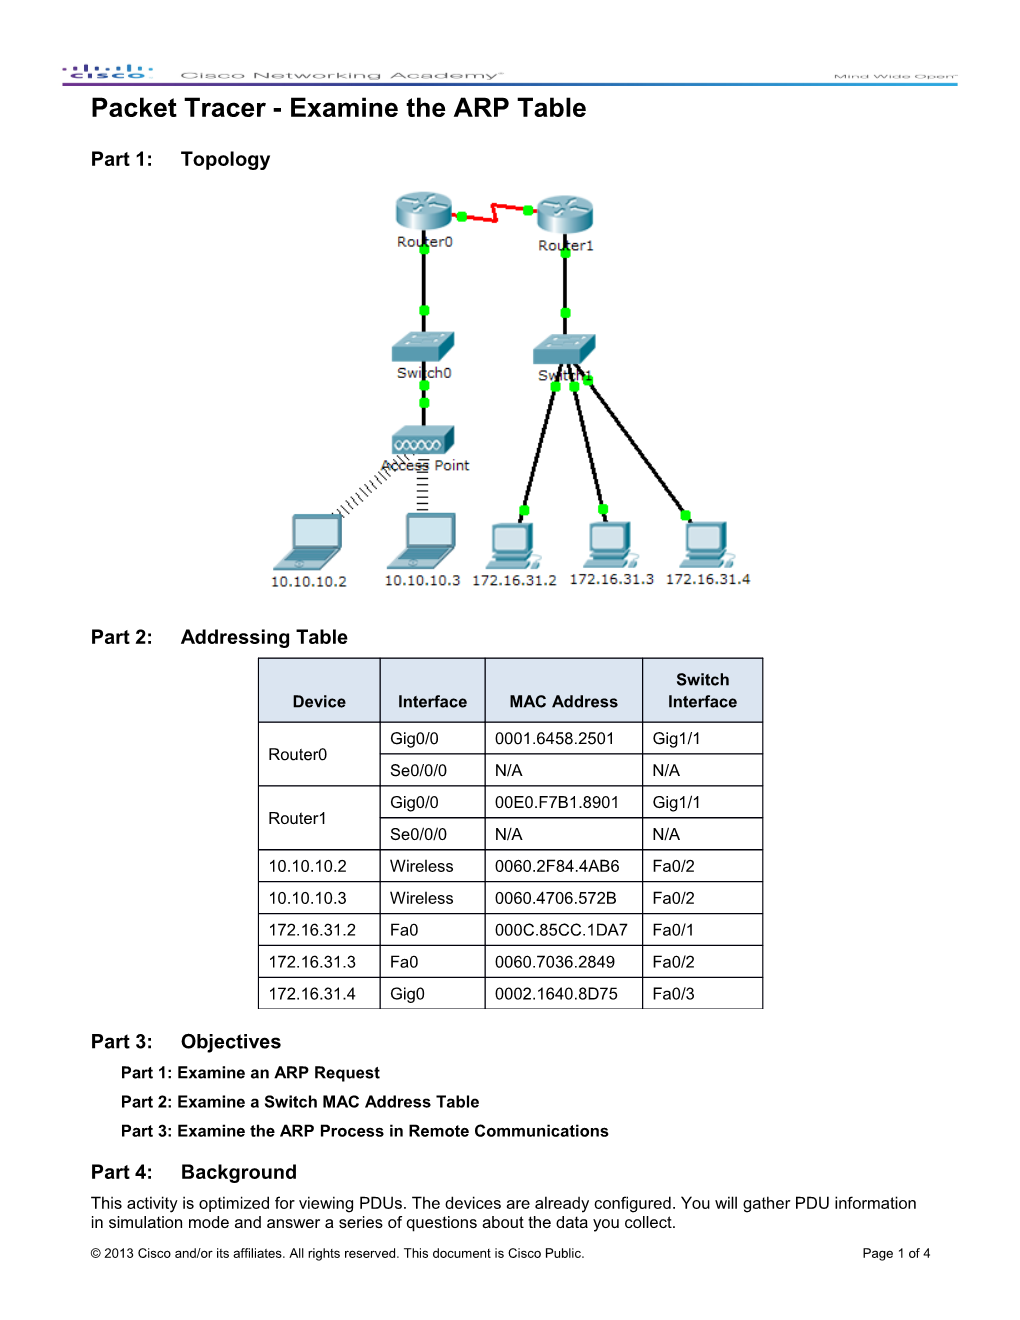 Packet Tracer - Examine the ARP Table